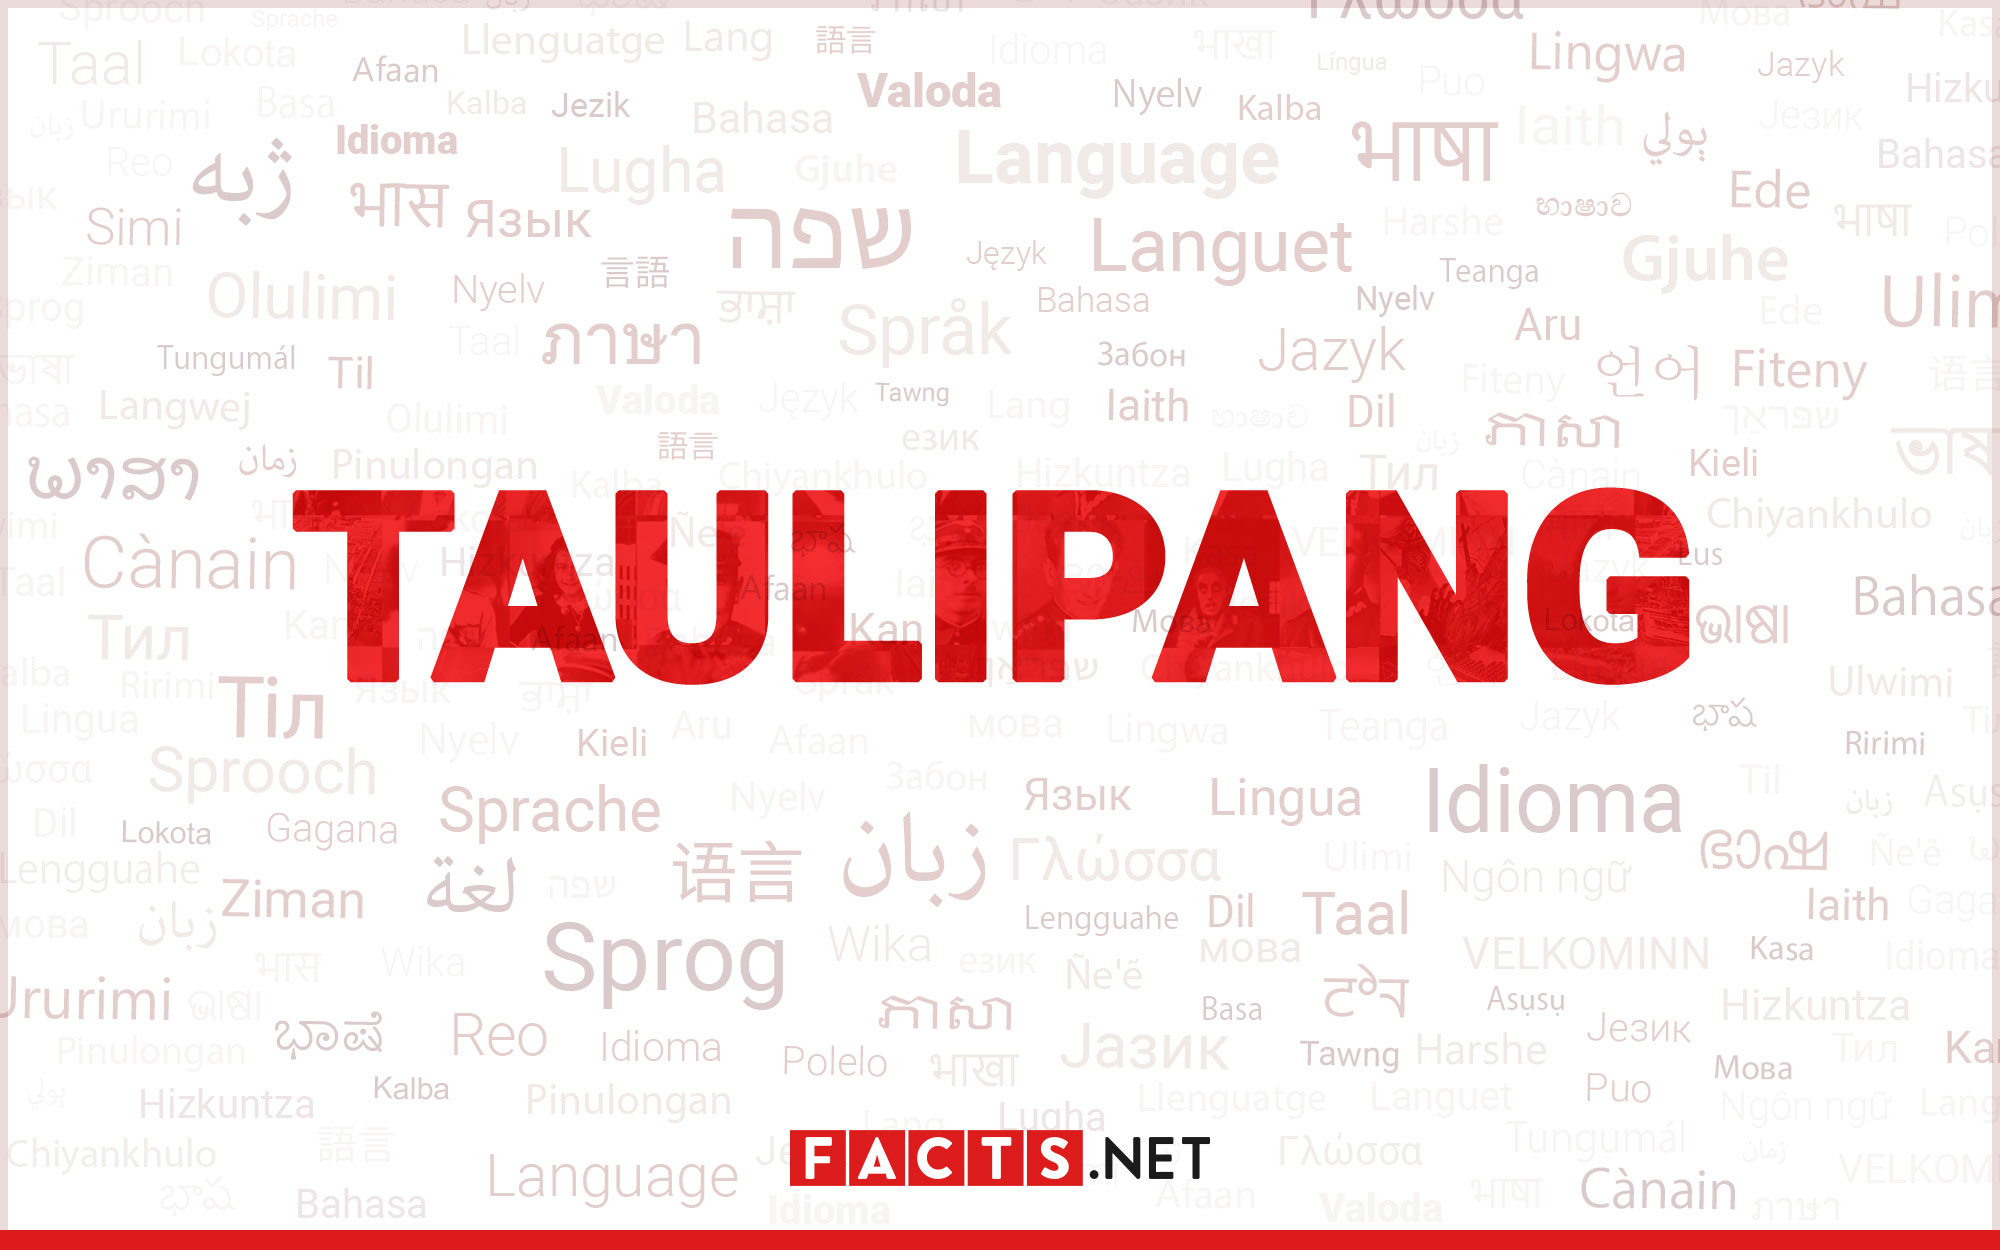 19-mind-blowing-facts-about-taulipang